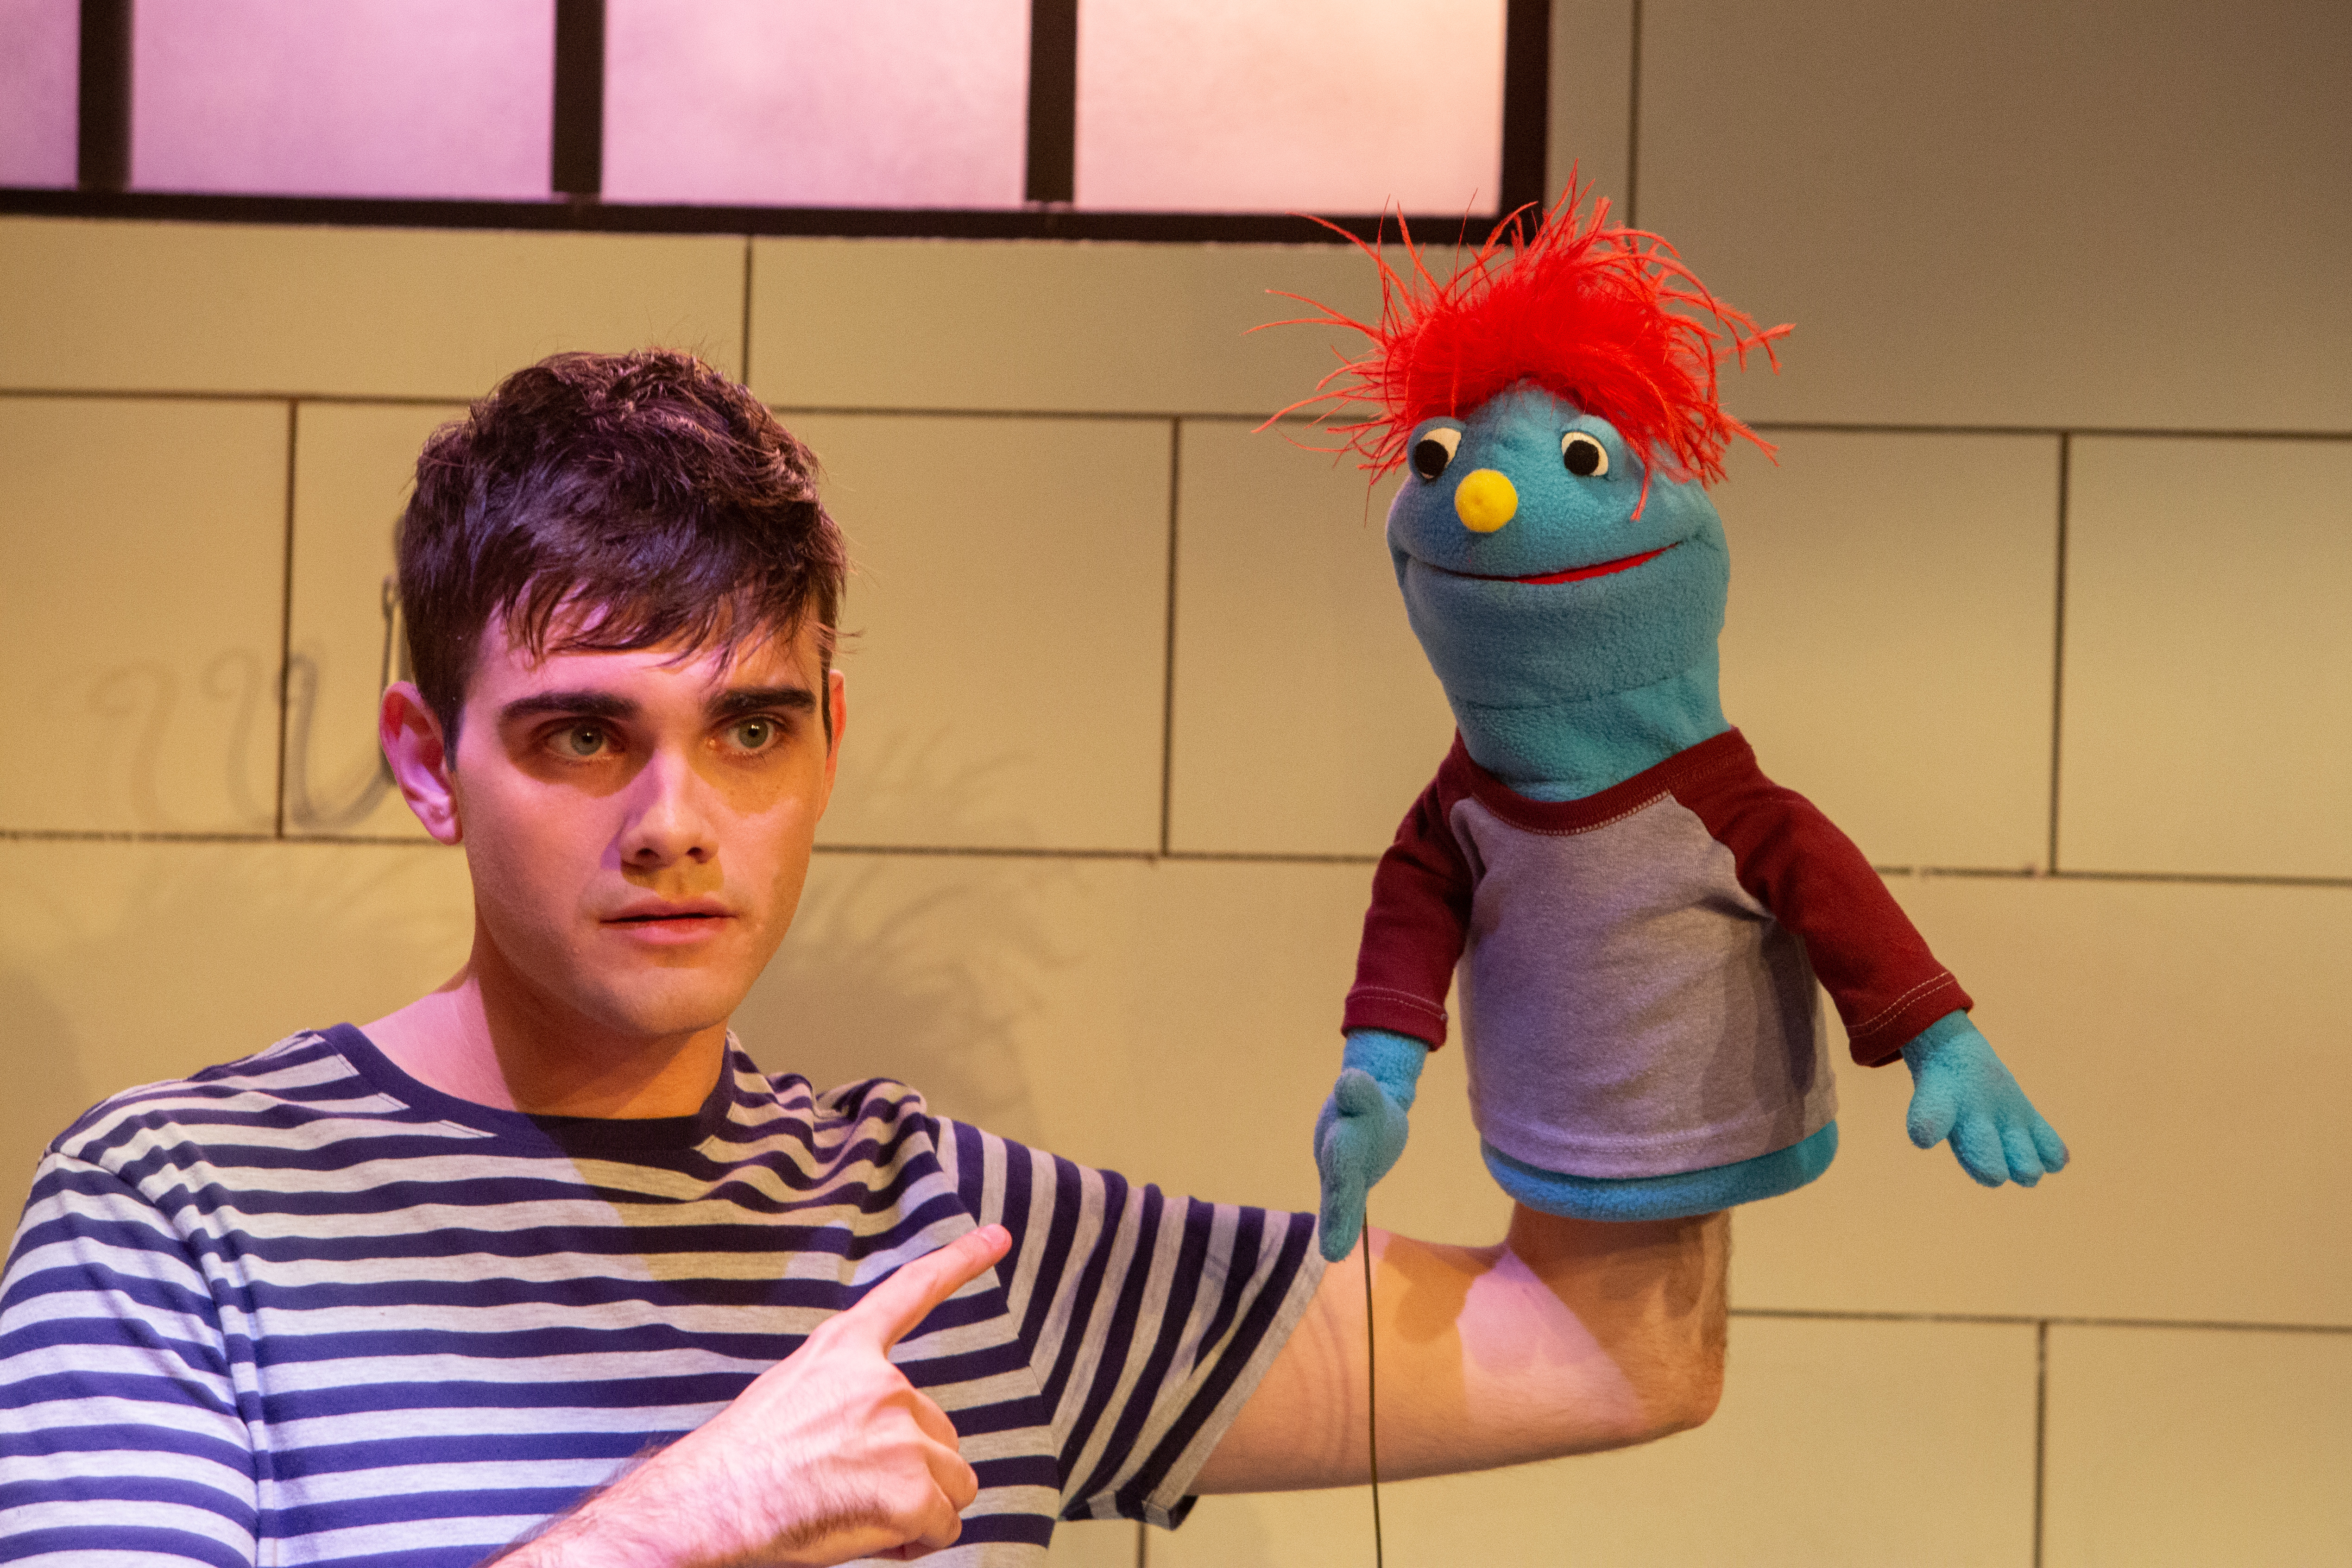 Anthony Pyatt was named best actor in a comedy for 2019 by the Orlando Sentinel for playing Jason and Tyrone the puppet, in the Mad Cow Theatre production of "Hand to God" (Orlando Sentinel file photo)